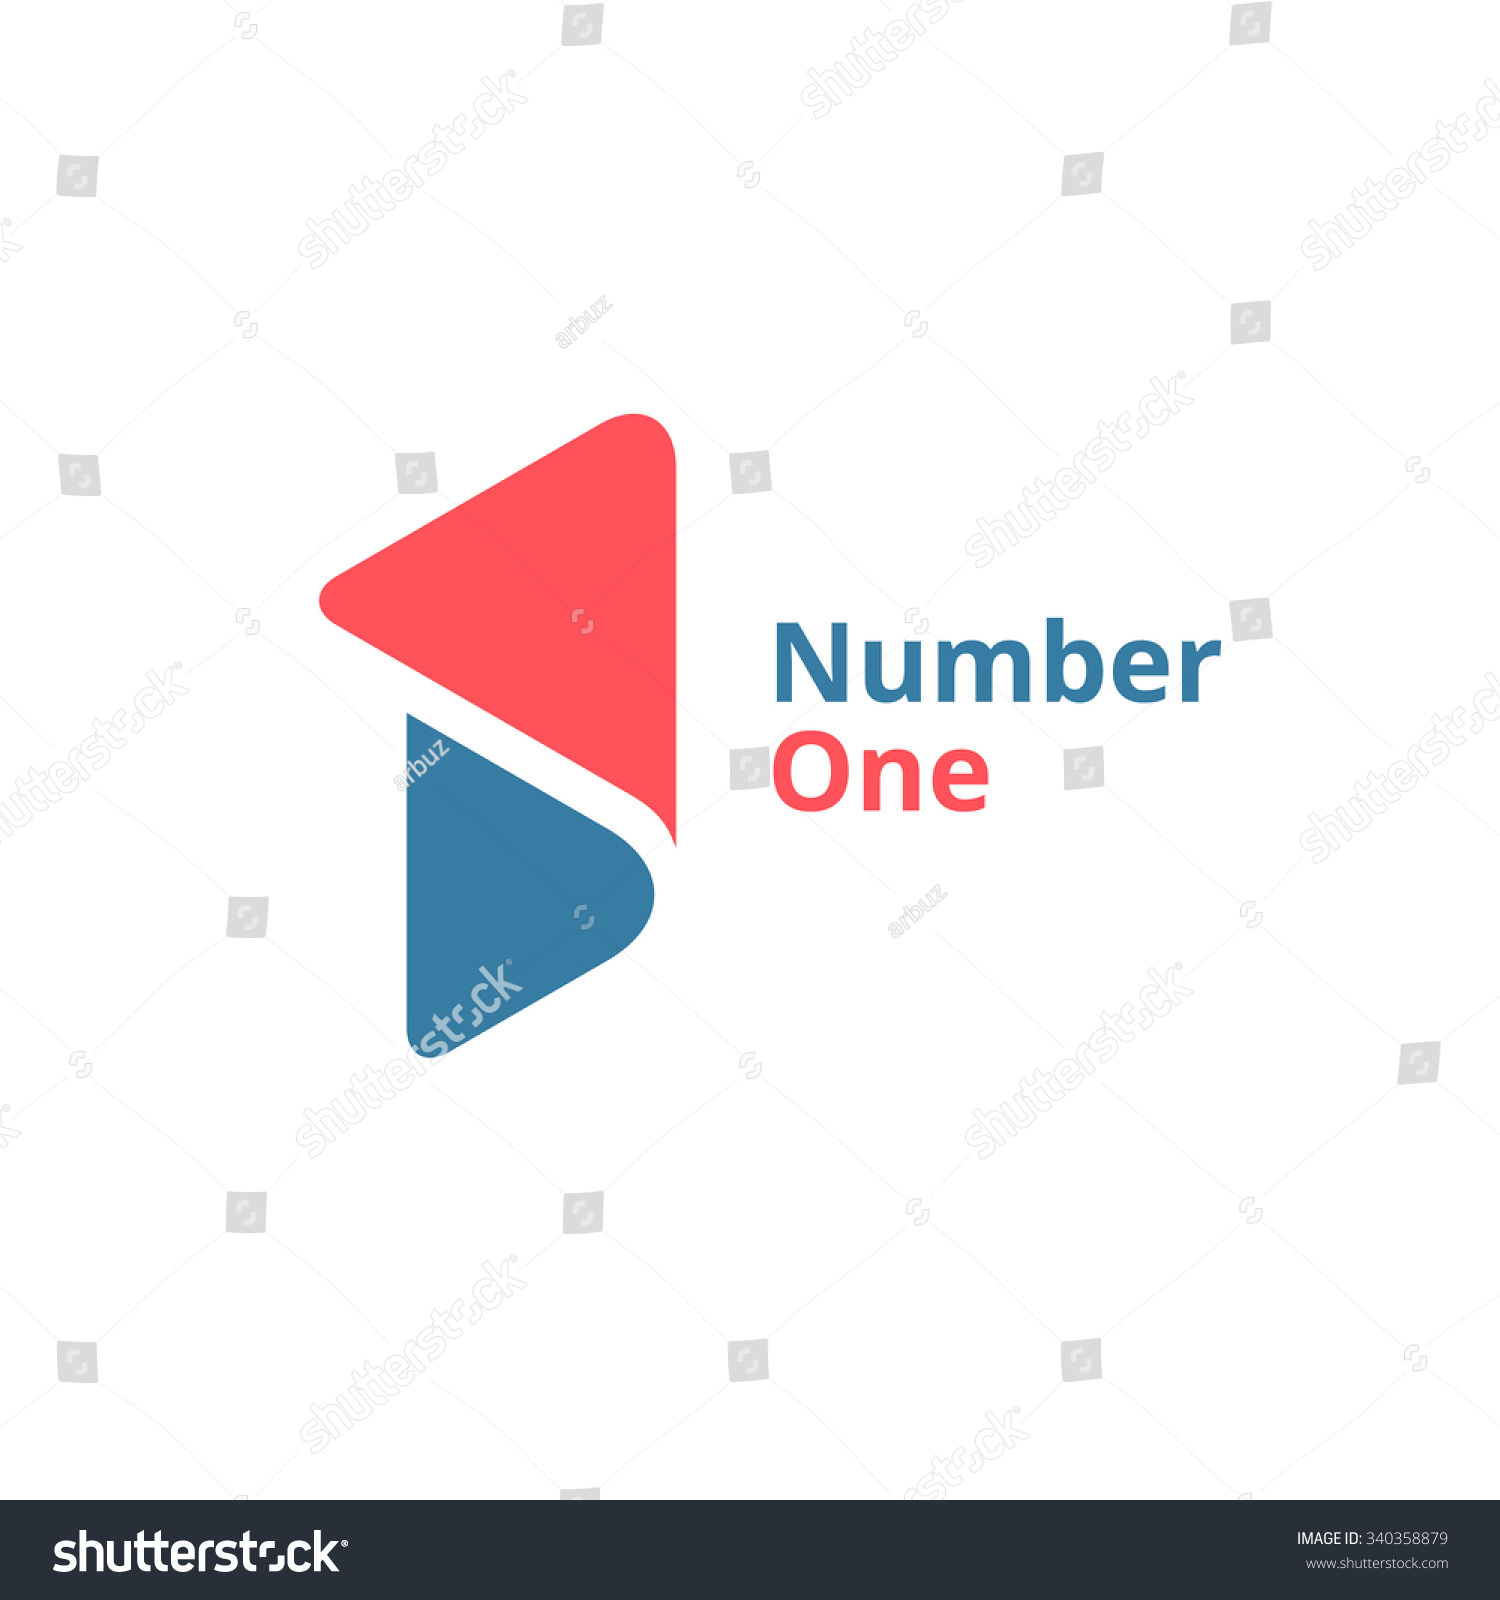 Number One 1 Logo Icon Design Stock Vector 340358879 - Shutterstock